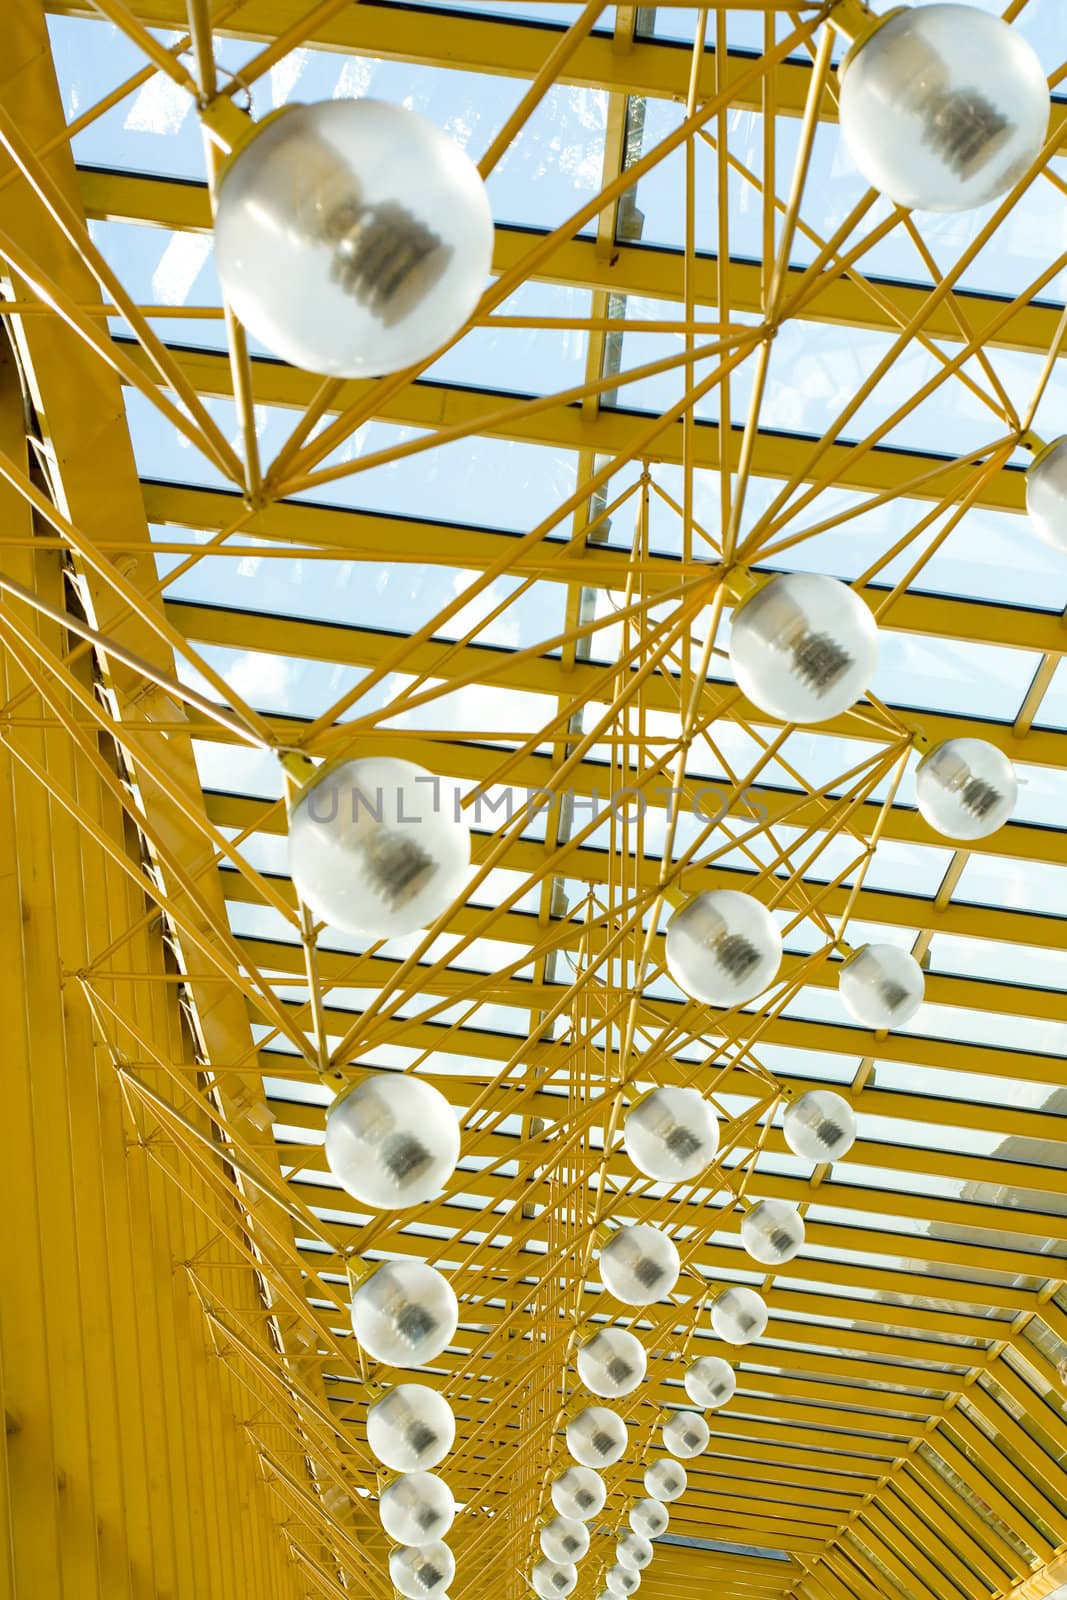 Glass and yellow metal interior construction